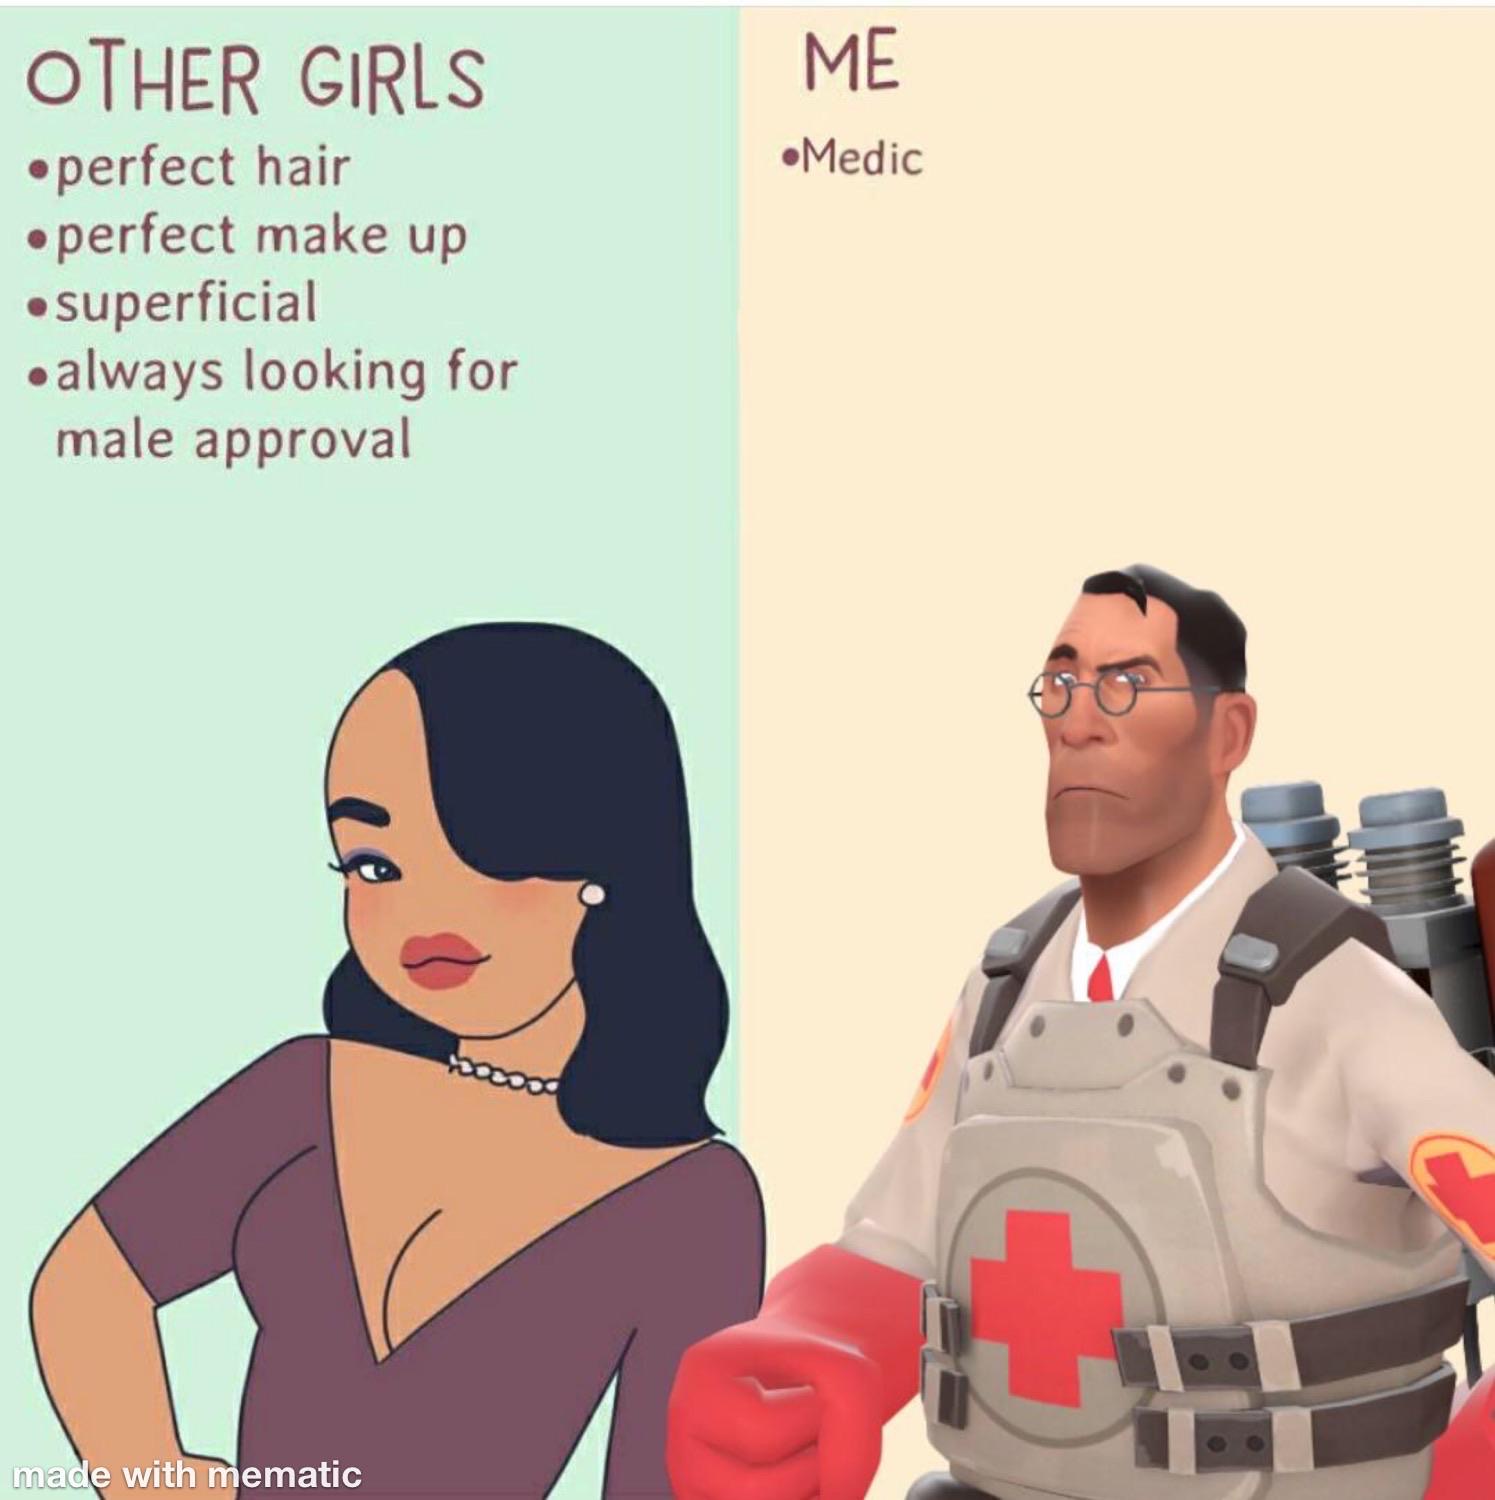 i m not like the other girls - Me Medic Other Girls perfect hair .perfect make up superficial always looking for male approval e C made with mematic